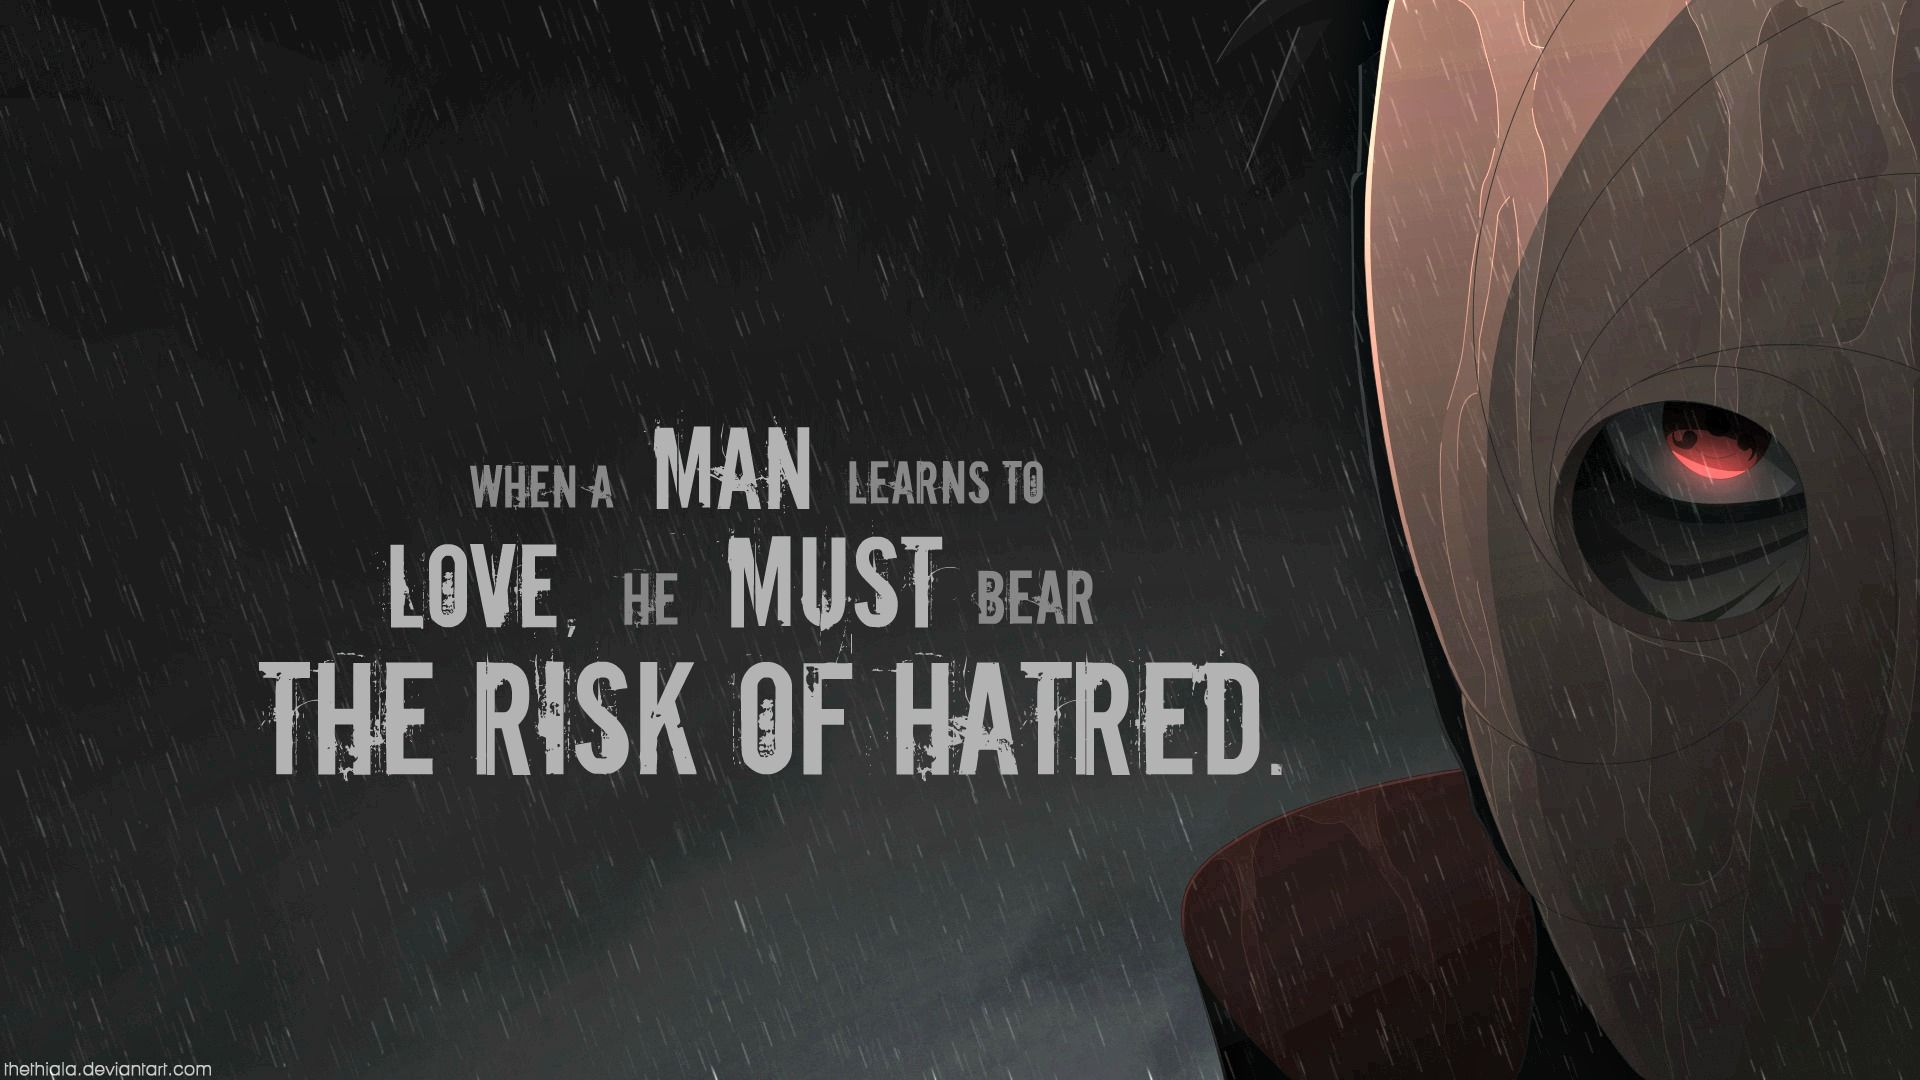 Quotes From Naruto Pain Wallpaper. QuotesGram